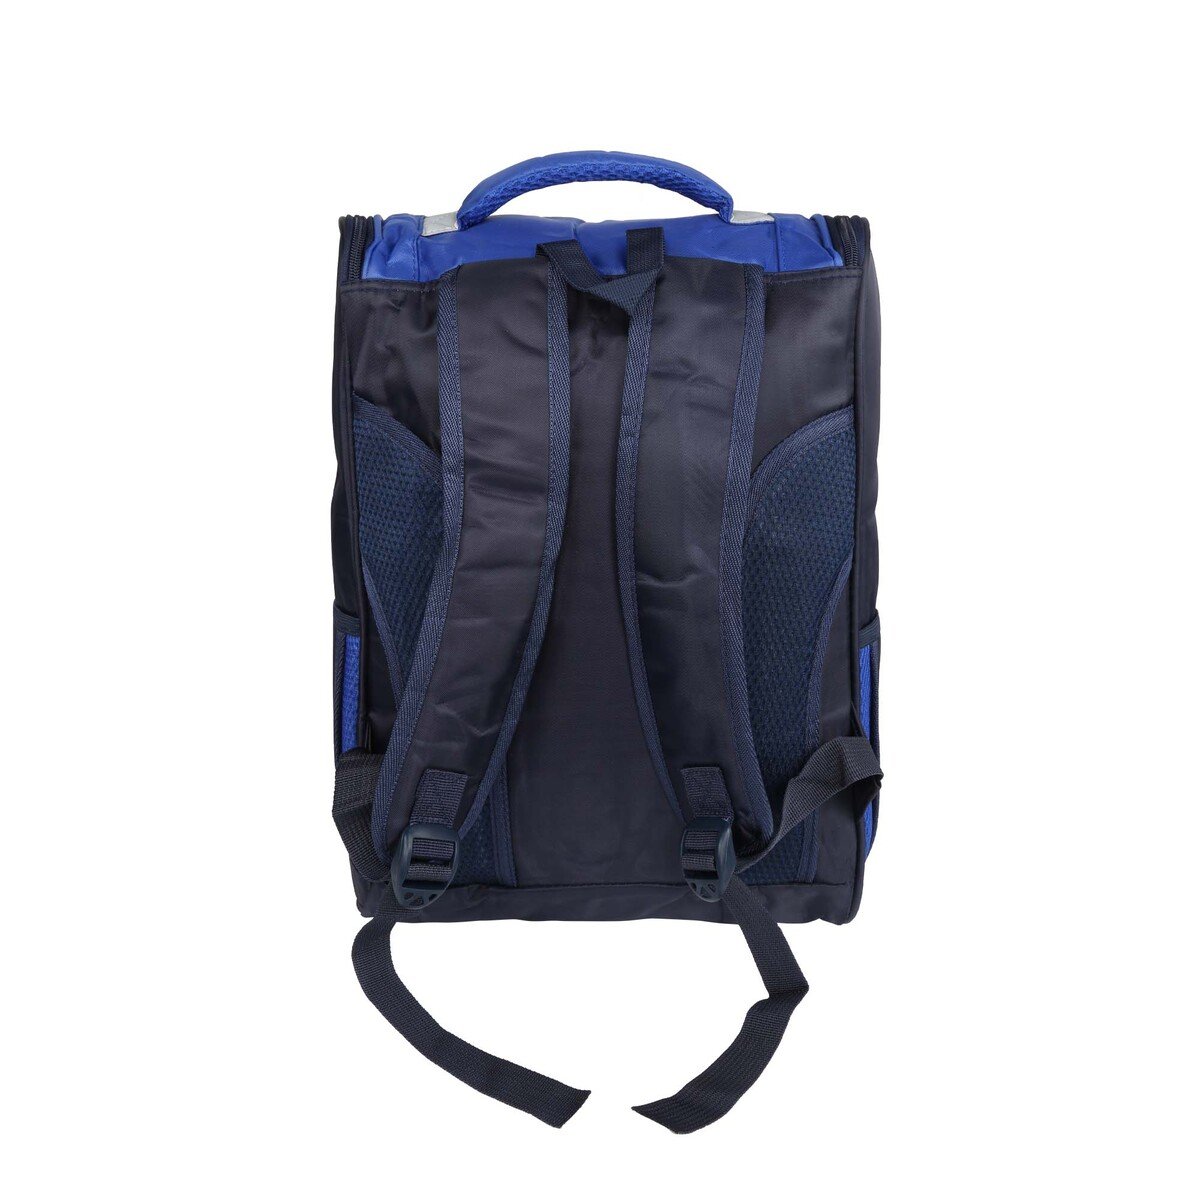 Polo Plus Backpack 9958 16 Inch Assorted